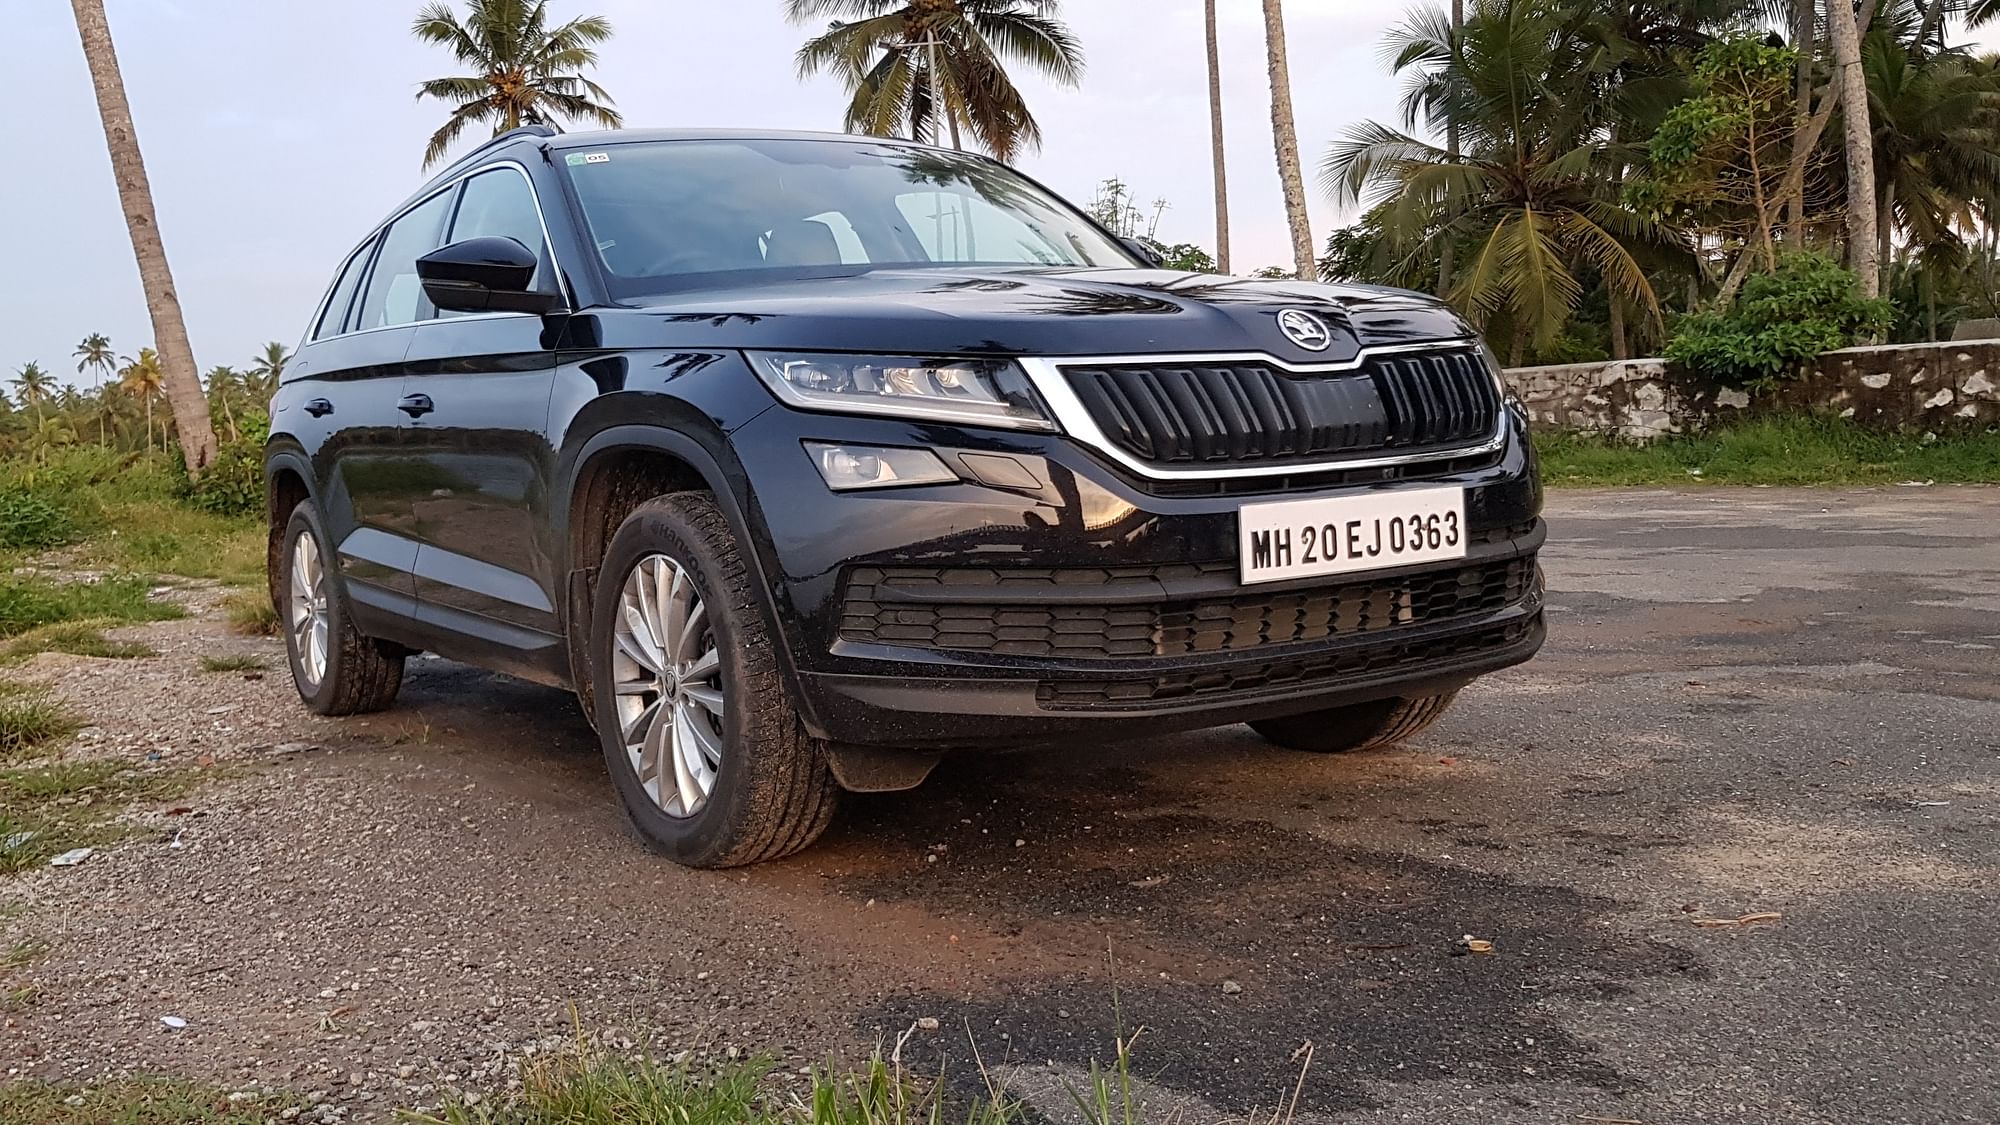 The Kodiaq is the first 7-seater from Skoda